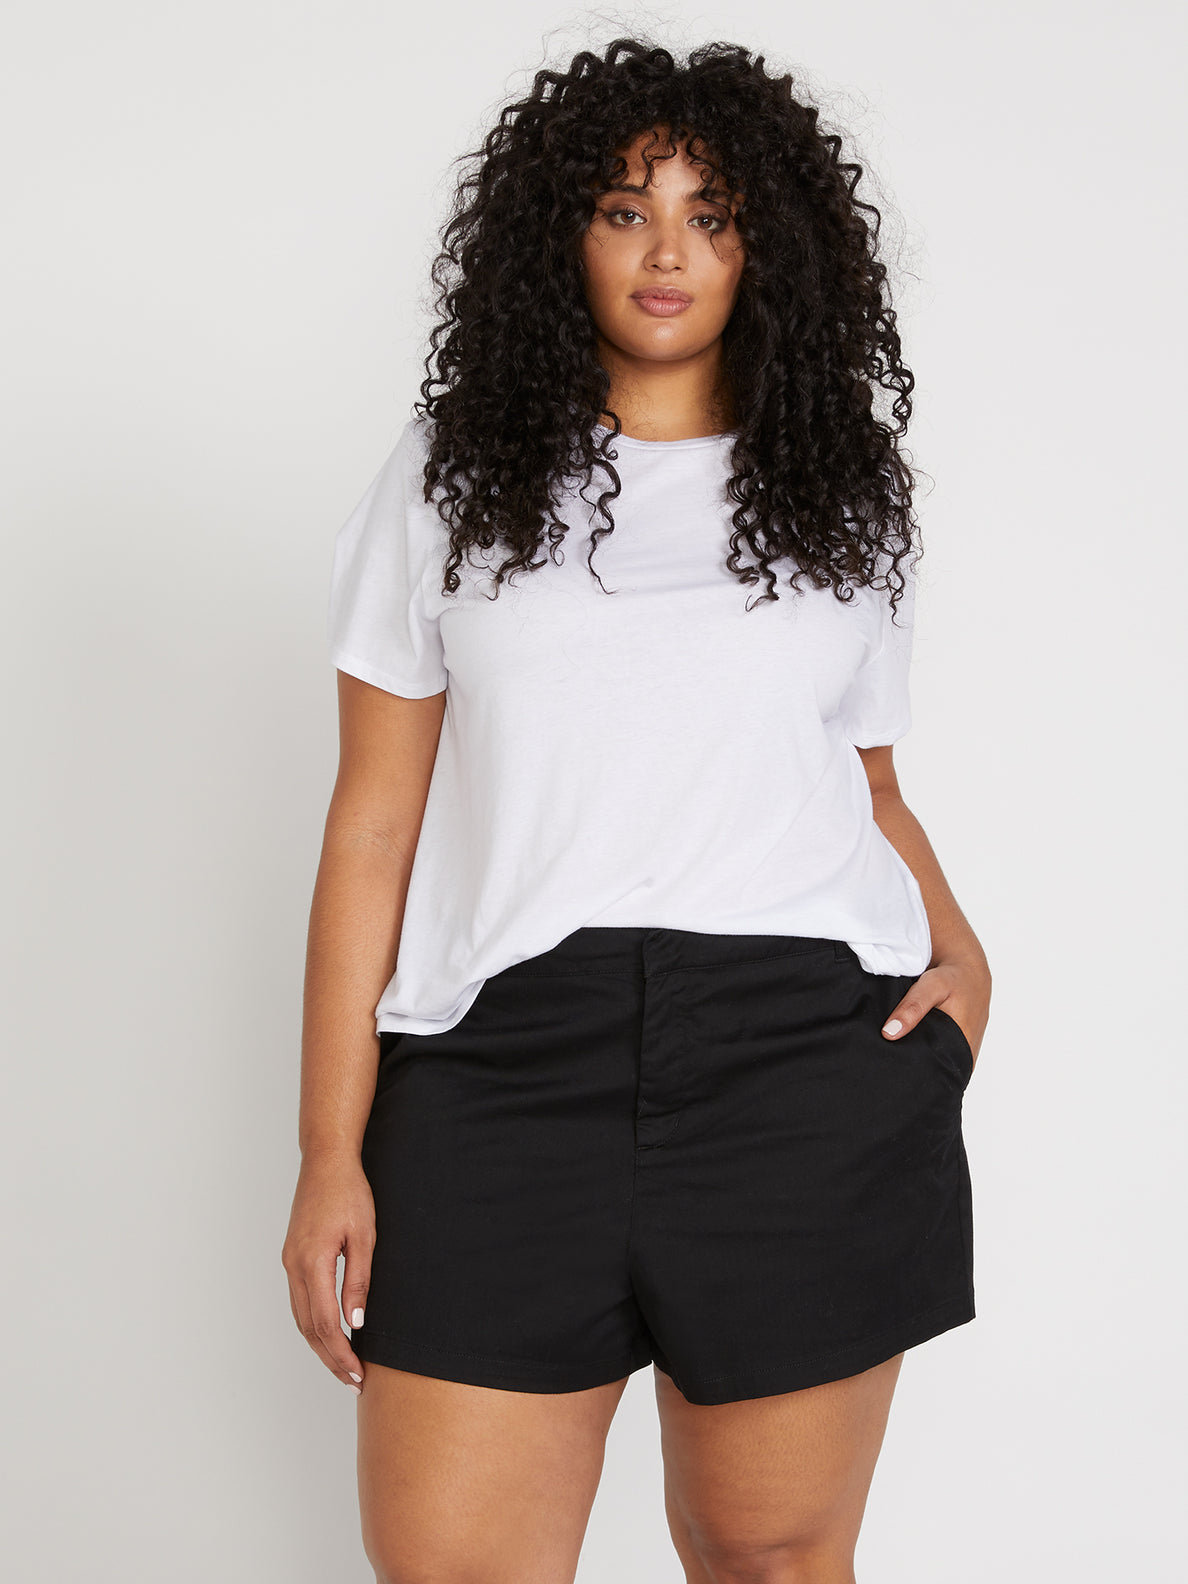 Frochickie Chino Shorts Plus Size - Black